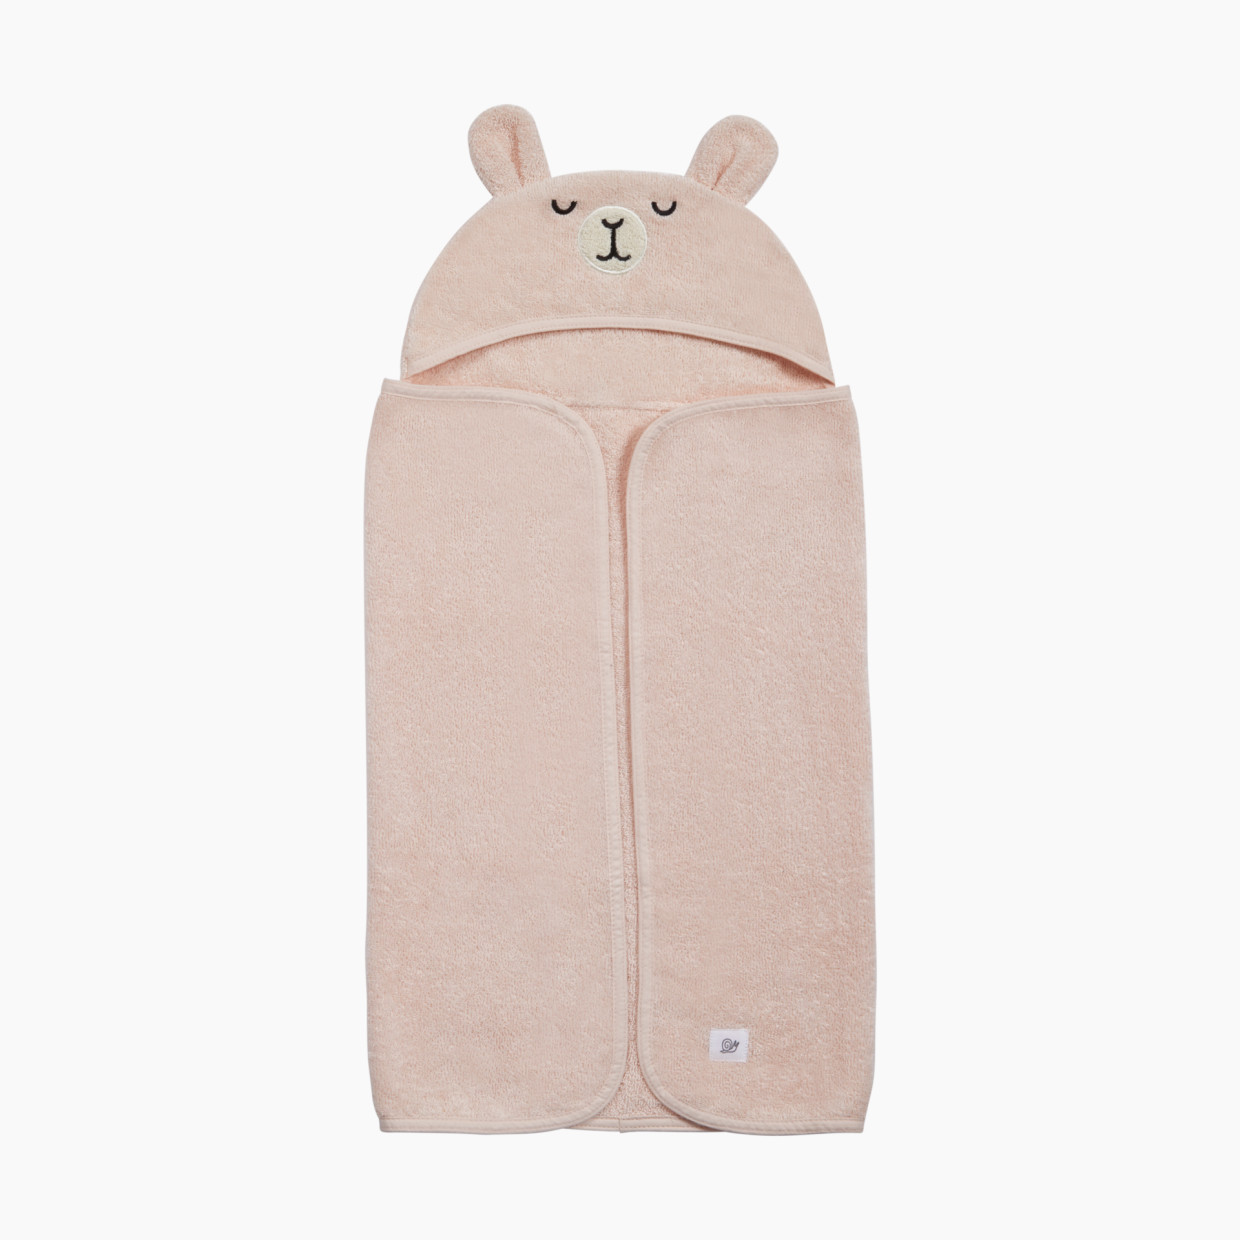 Tiny Kind The Cozy Critter Towel - Cloud Pink Bunny, 0-24 M.